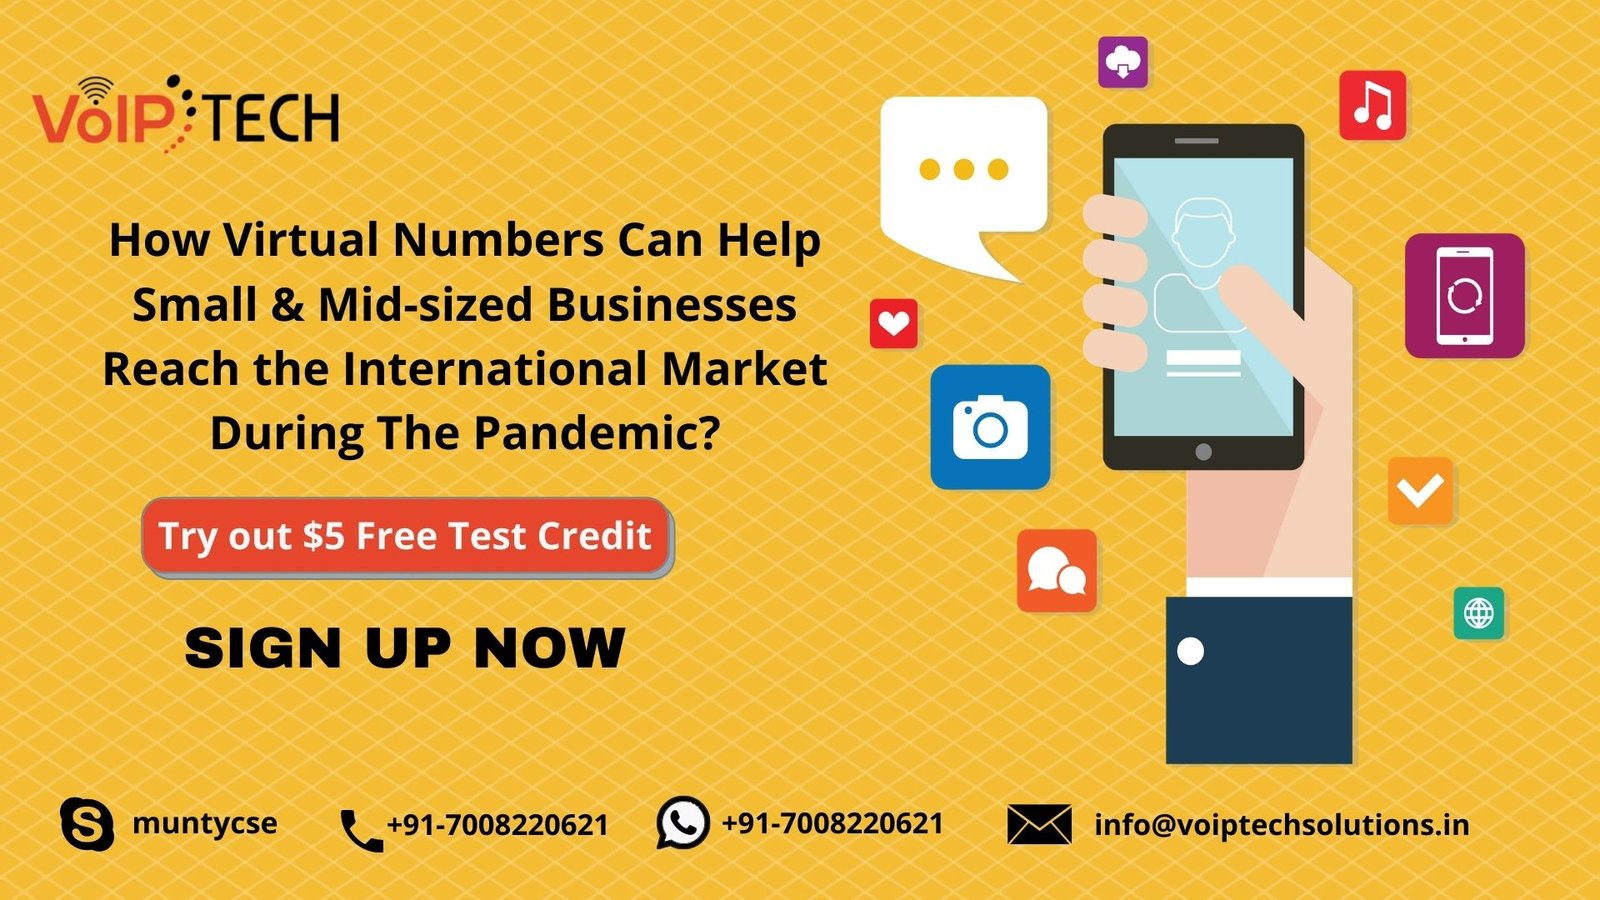 How Virtual Numbers Can Help Small & Mid-sized Businesses Reach the International Market During The Pandemic, Exploring The VoIP Technology from Business Point of view. Pros & Cons! ,VoIP Business, VoIP tech solutions, vici dialer, virtual number, Voip Providers, voip services in india, best sip provider, business voip providers, VoIP Phone Numbers, voip minutes provider, top voip providers, voip minutes, International VoIP Provider